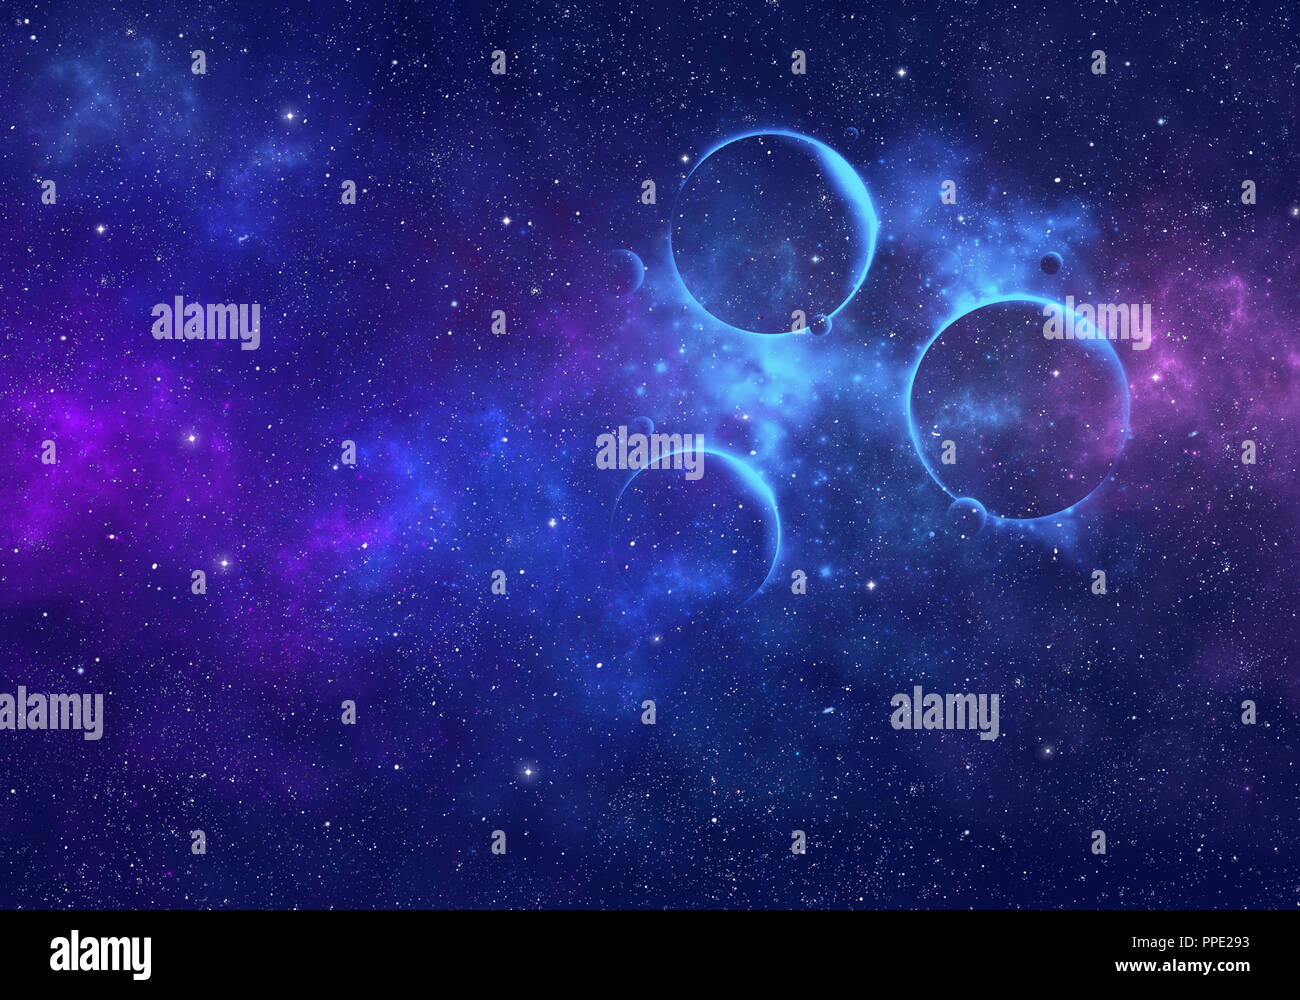 Planets in outer space with nebula and stars Stock Photo